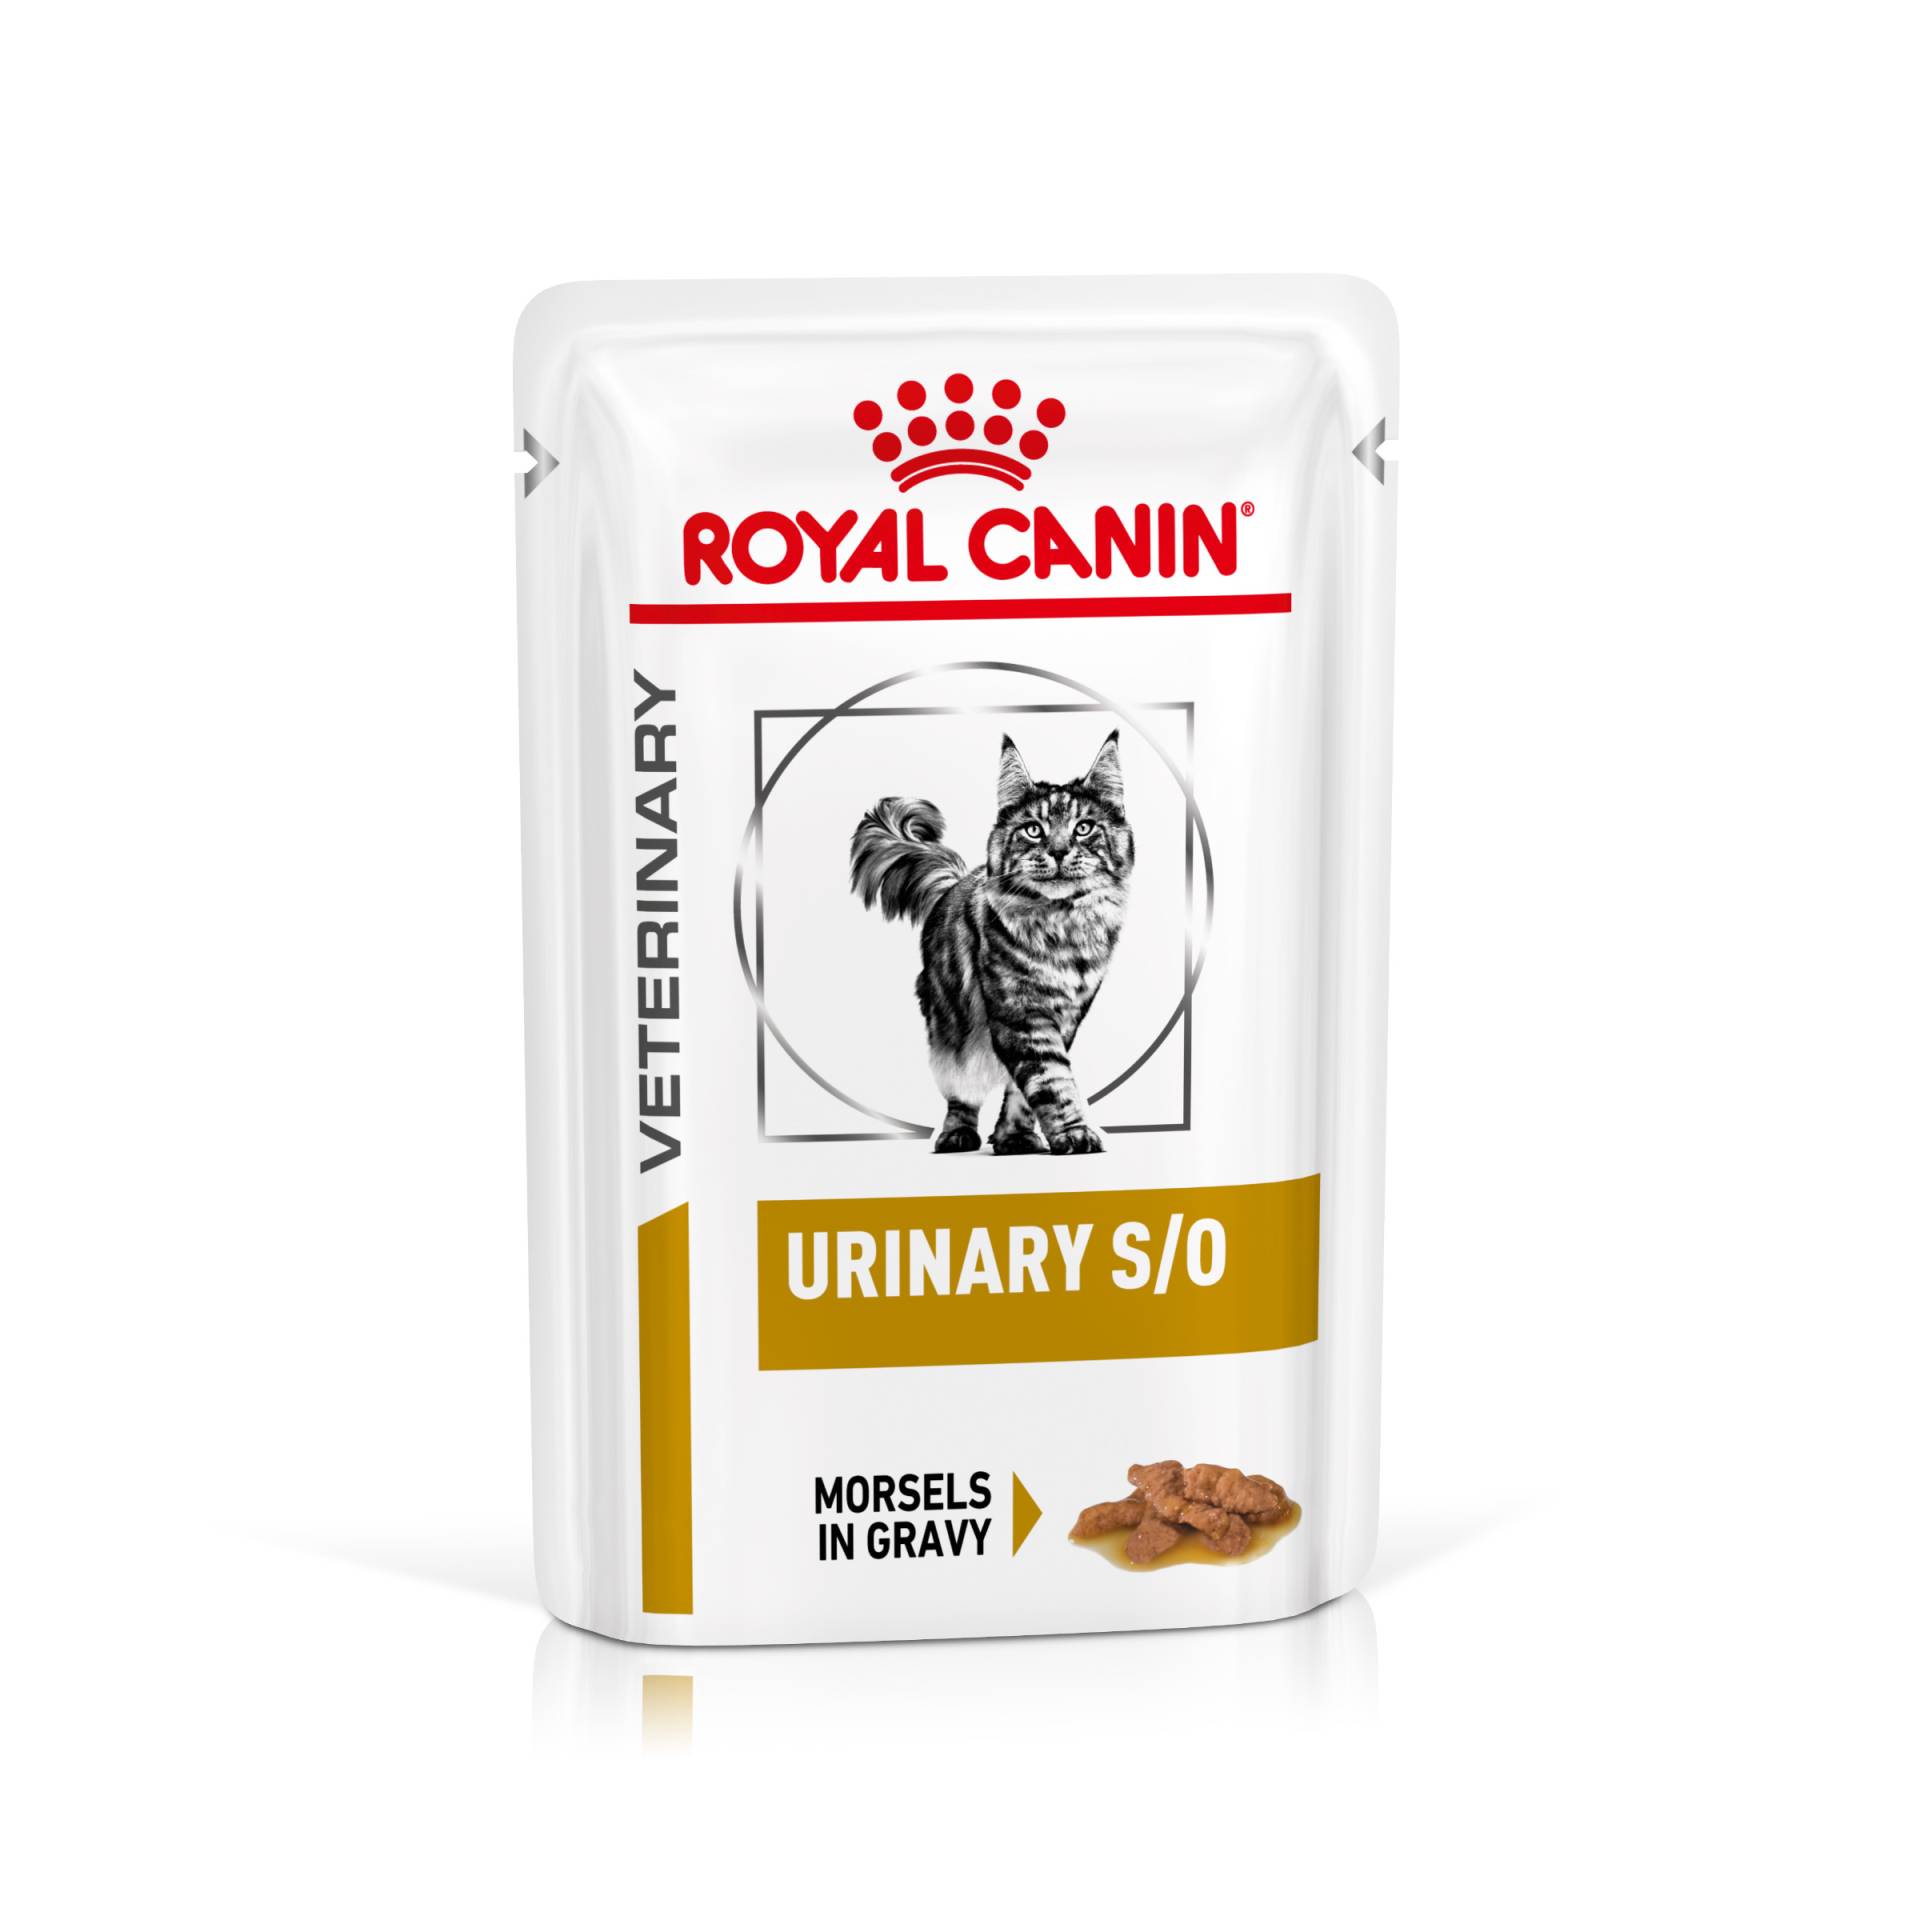 Royal Canin Veterinary Feline Urinary S/O in Soße oder Mousse - Häppchen in Soße (24 x 85 g) von Royal Canin Veterinary Diet